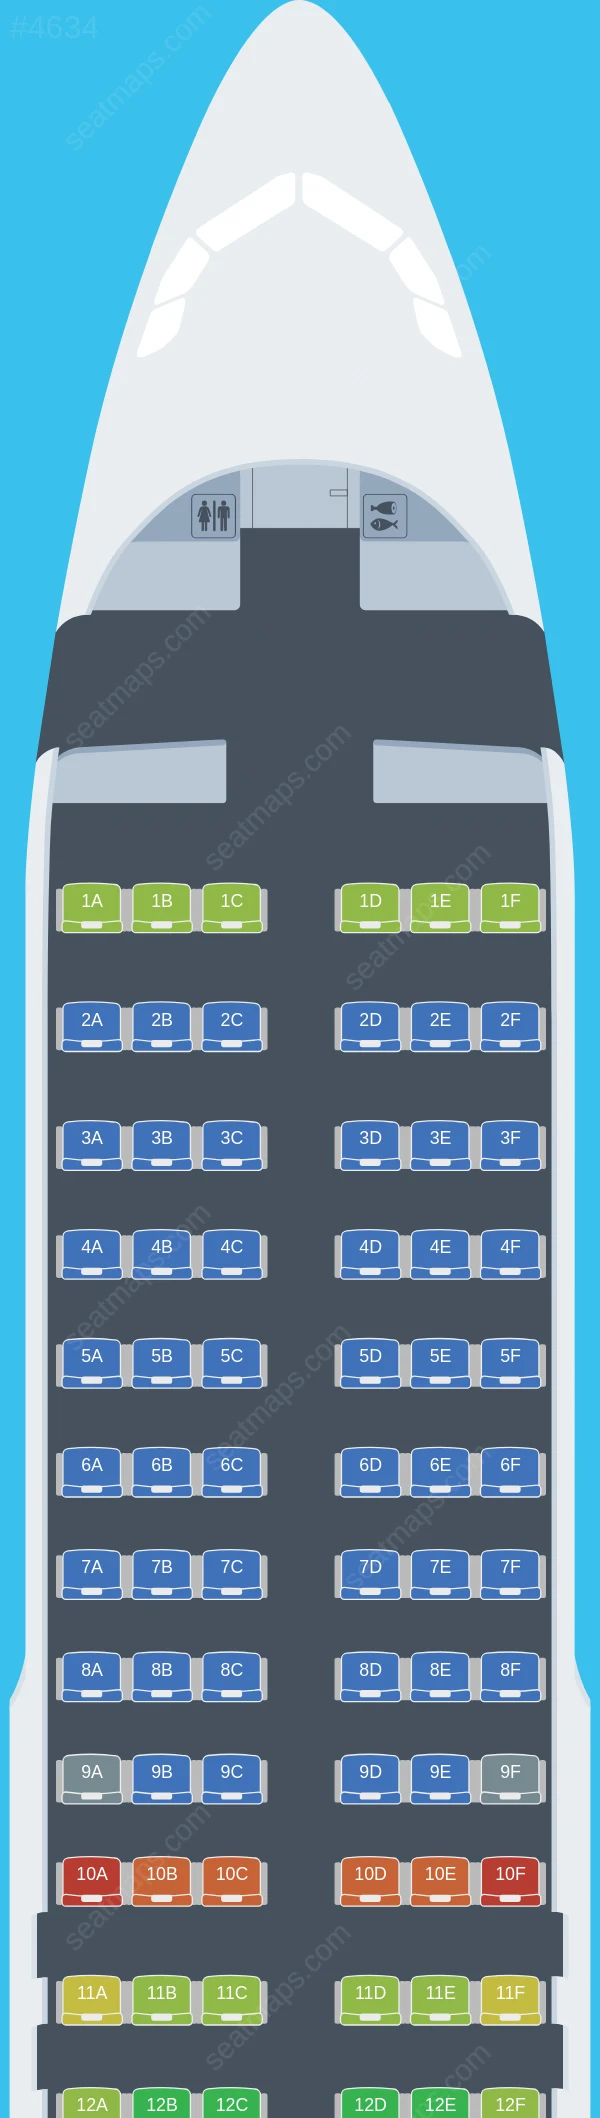 LATAM Airlines Colombia Airbus A320-200 seatmap preview